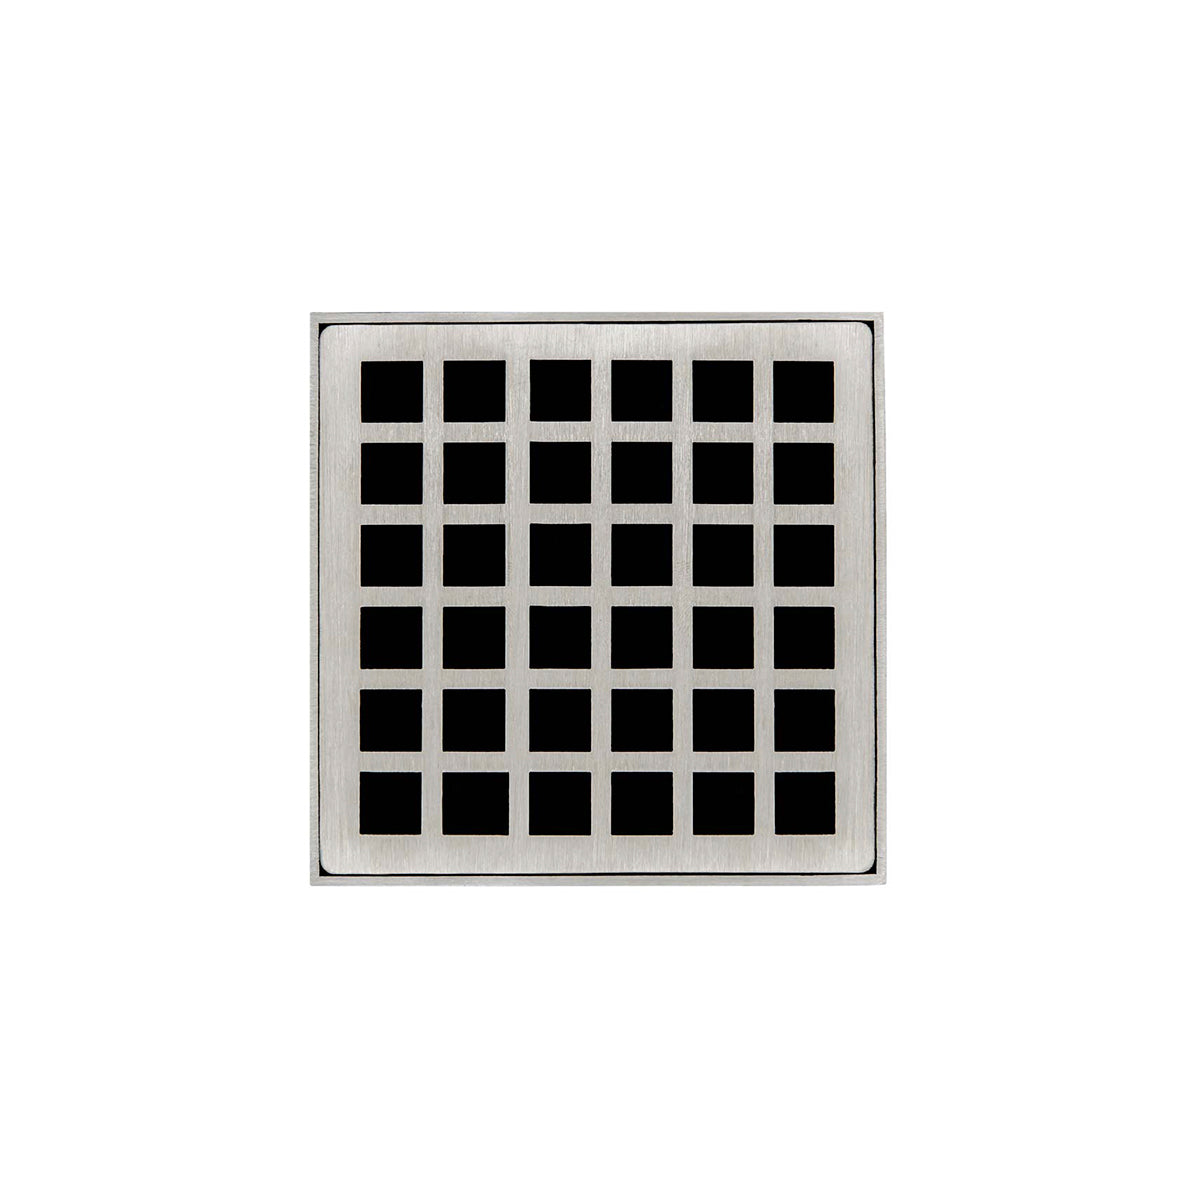 Infinity Drain 4" x 4" Strainer Premium Center Drain Kit with Squares Pattern Decorative Plate and 2" Throat for QD 4